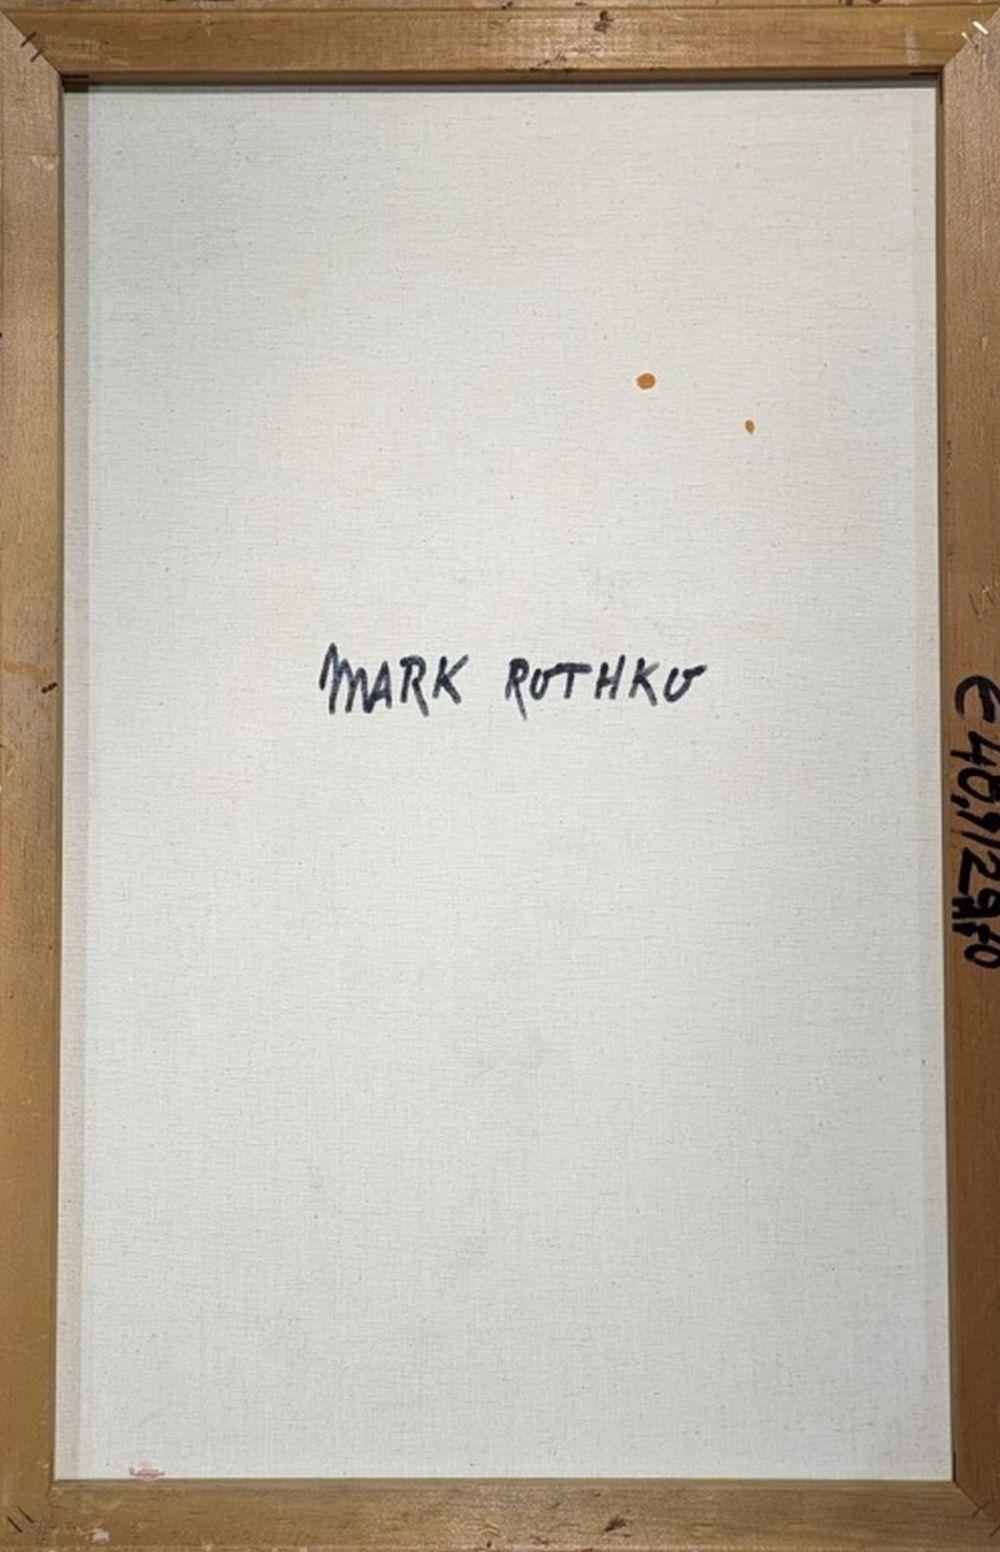 Artwork by Mark Rothko, Original in the Manner of Mark Rothko, Made of Oil on canvas